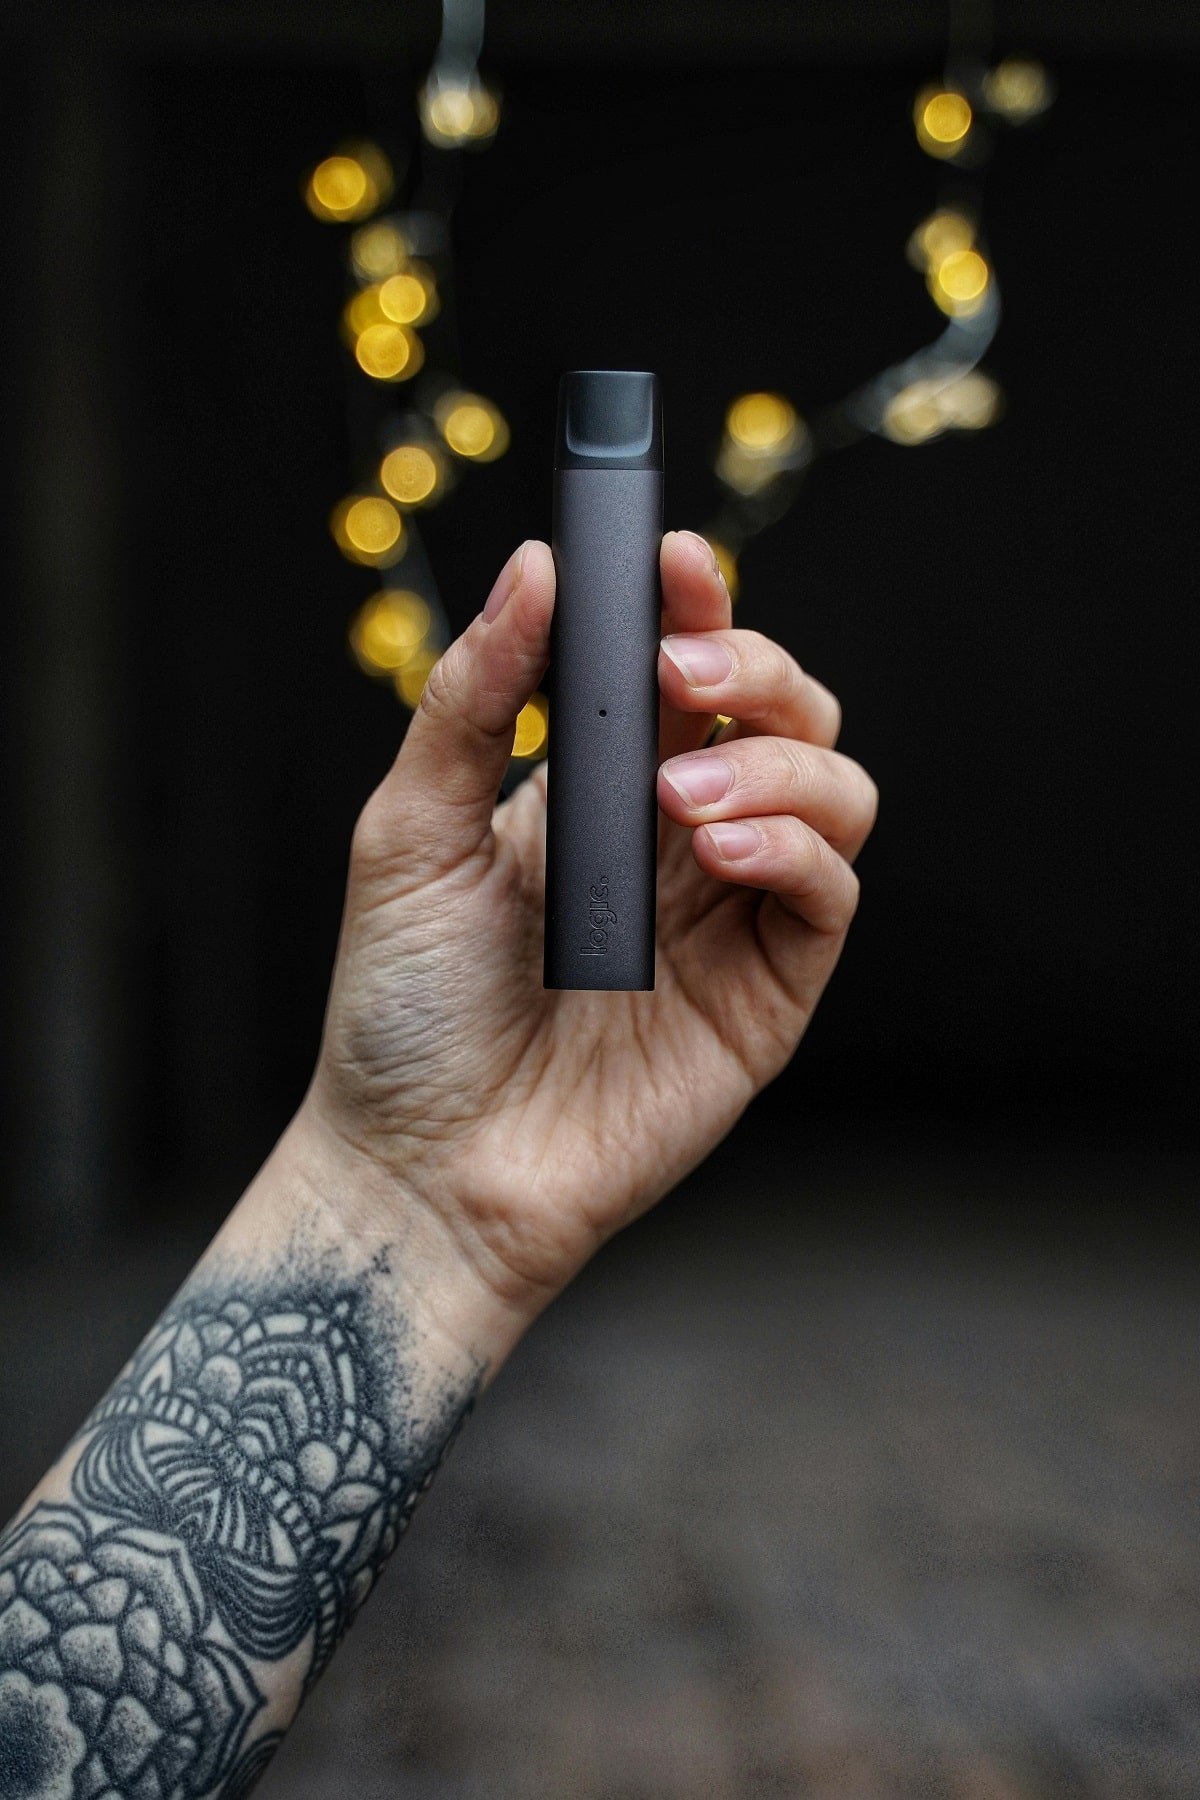 Key Tips For Switching From Smoking to Vaping